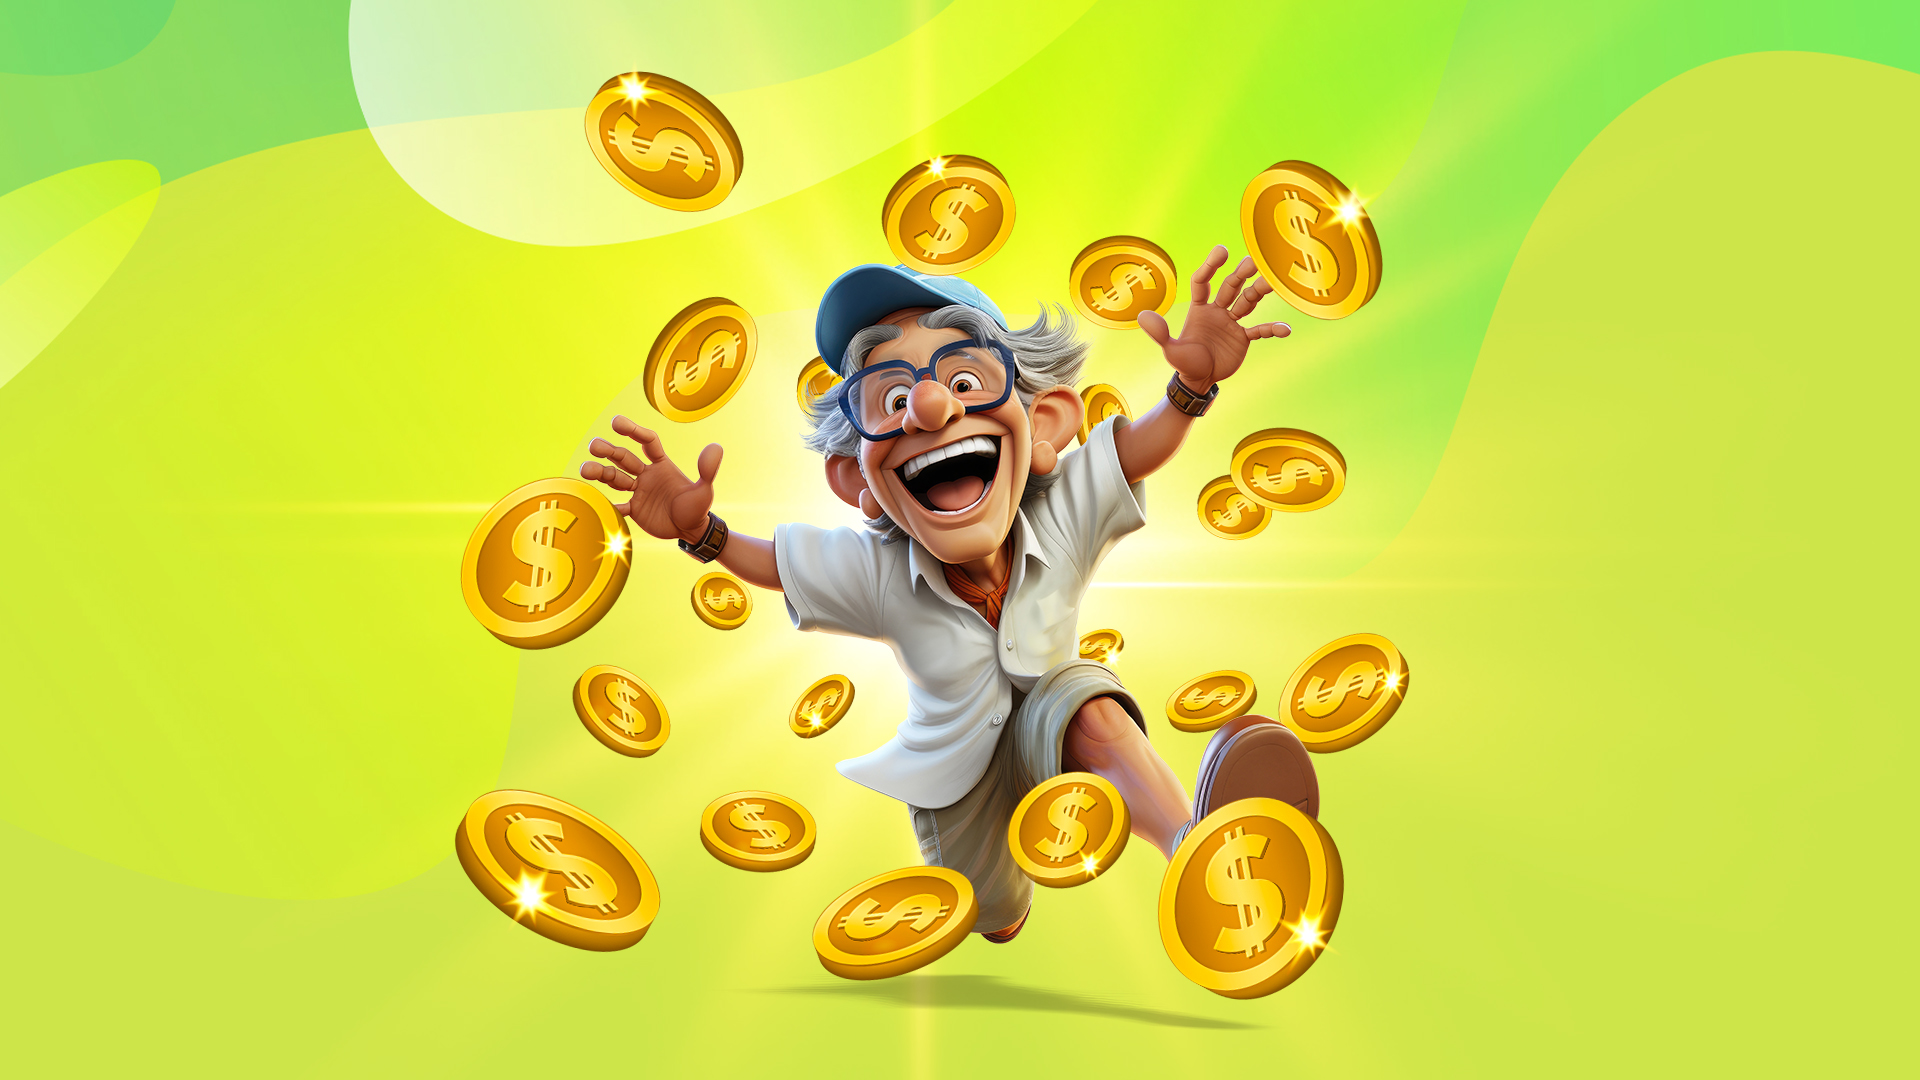 A male animated character is leaping forward in a happy manner, while gold coins fall around him, on a two-tone green background.